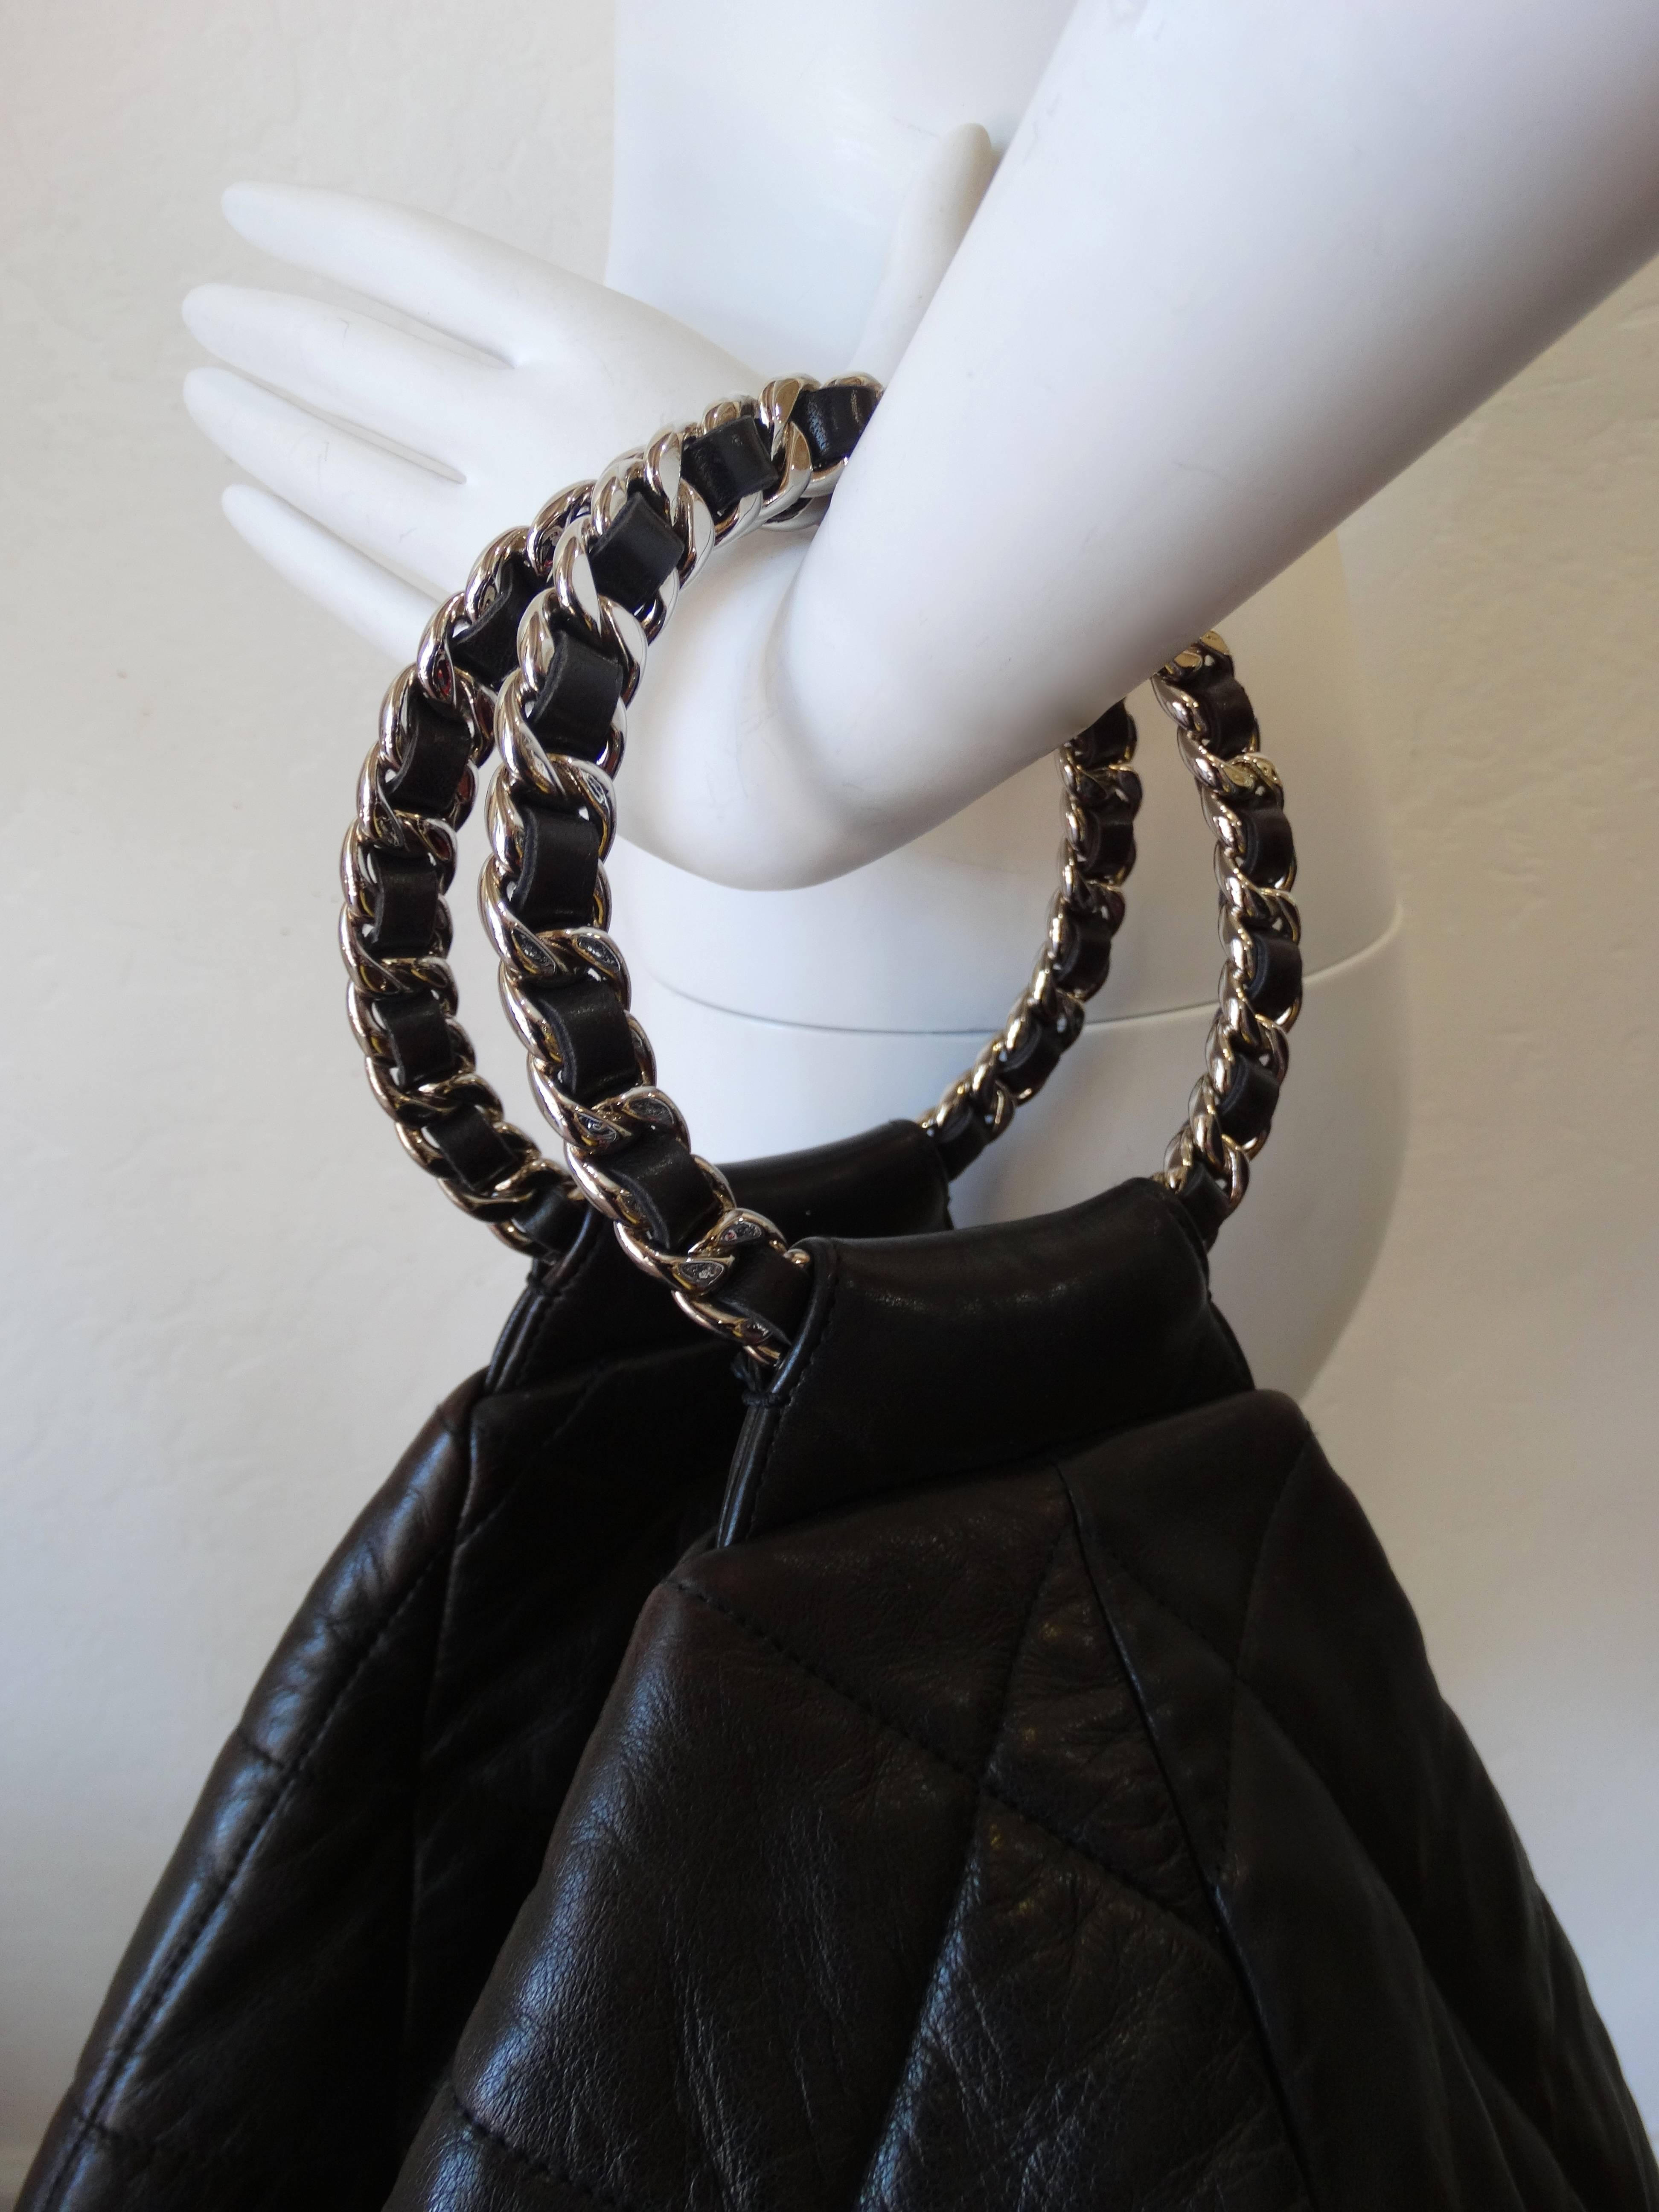 The perfect back for carrying all your daily must haves- the black quilted Chanel hobo bag! Made of a rich and soft black calfskin leather, with the classic Chanel quilting stitched in. Has two chain rings woven with black leather for handles. Zips